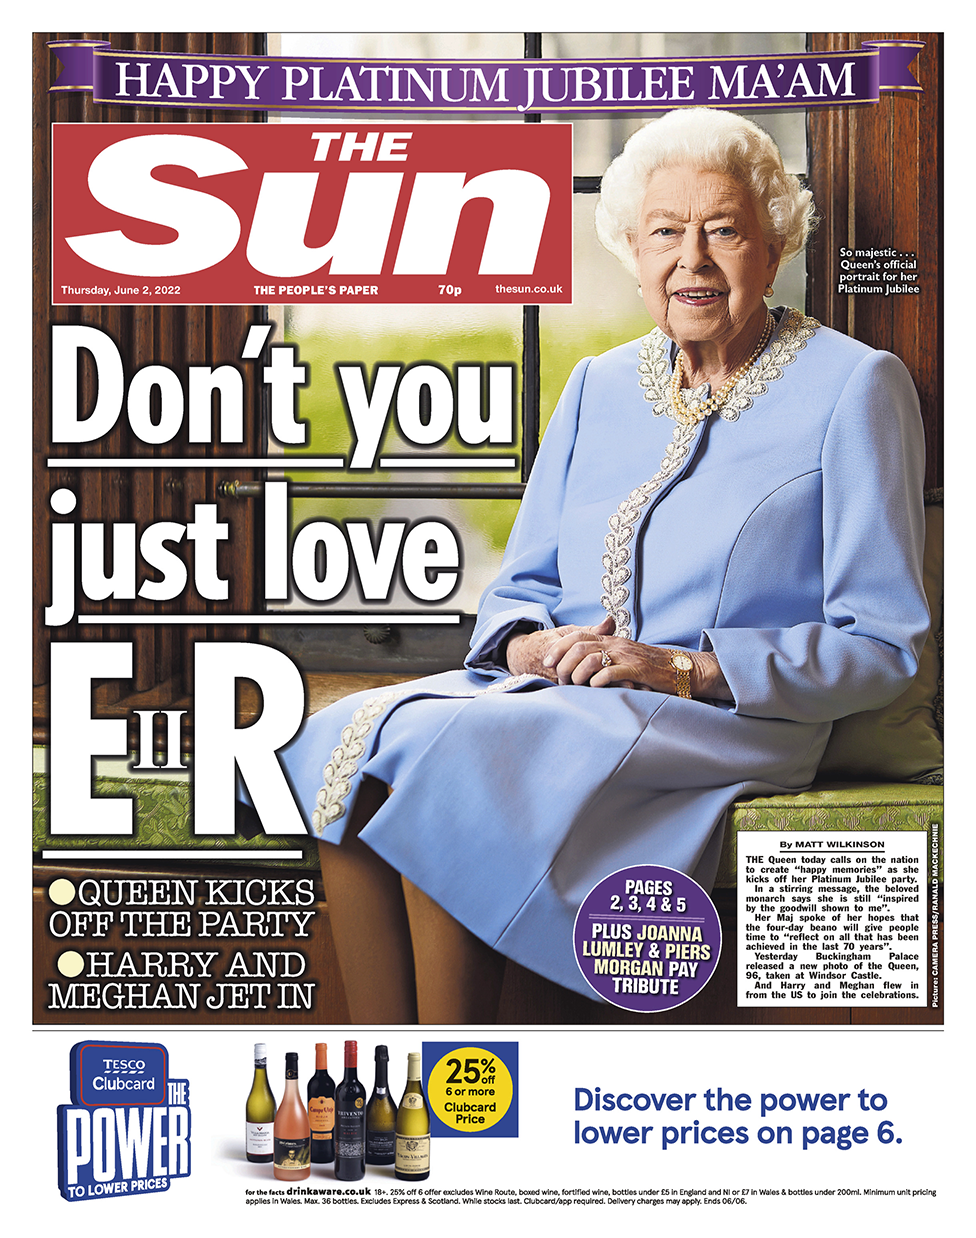 The headline in the Sun reads 'Don't you just love ER'